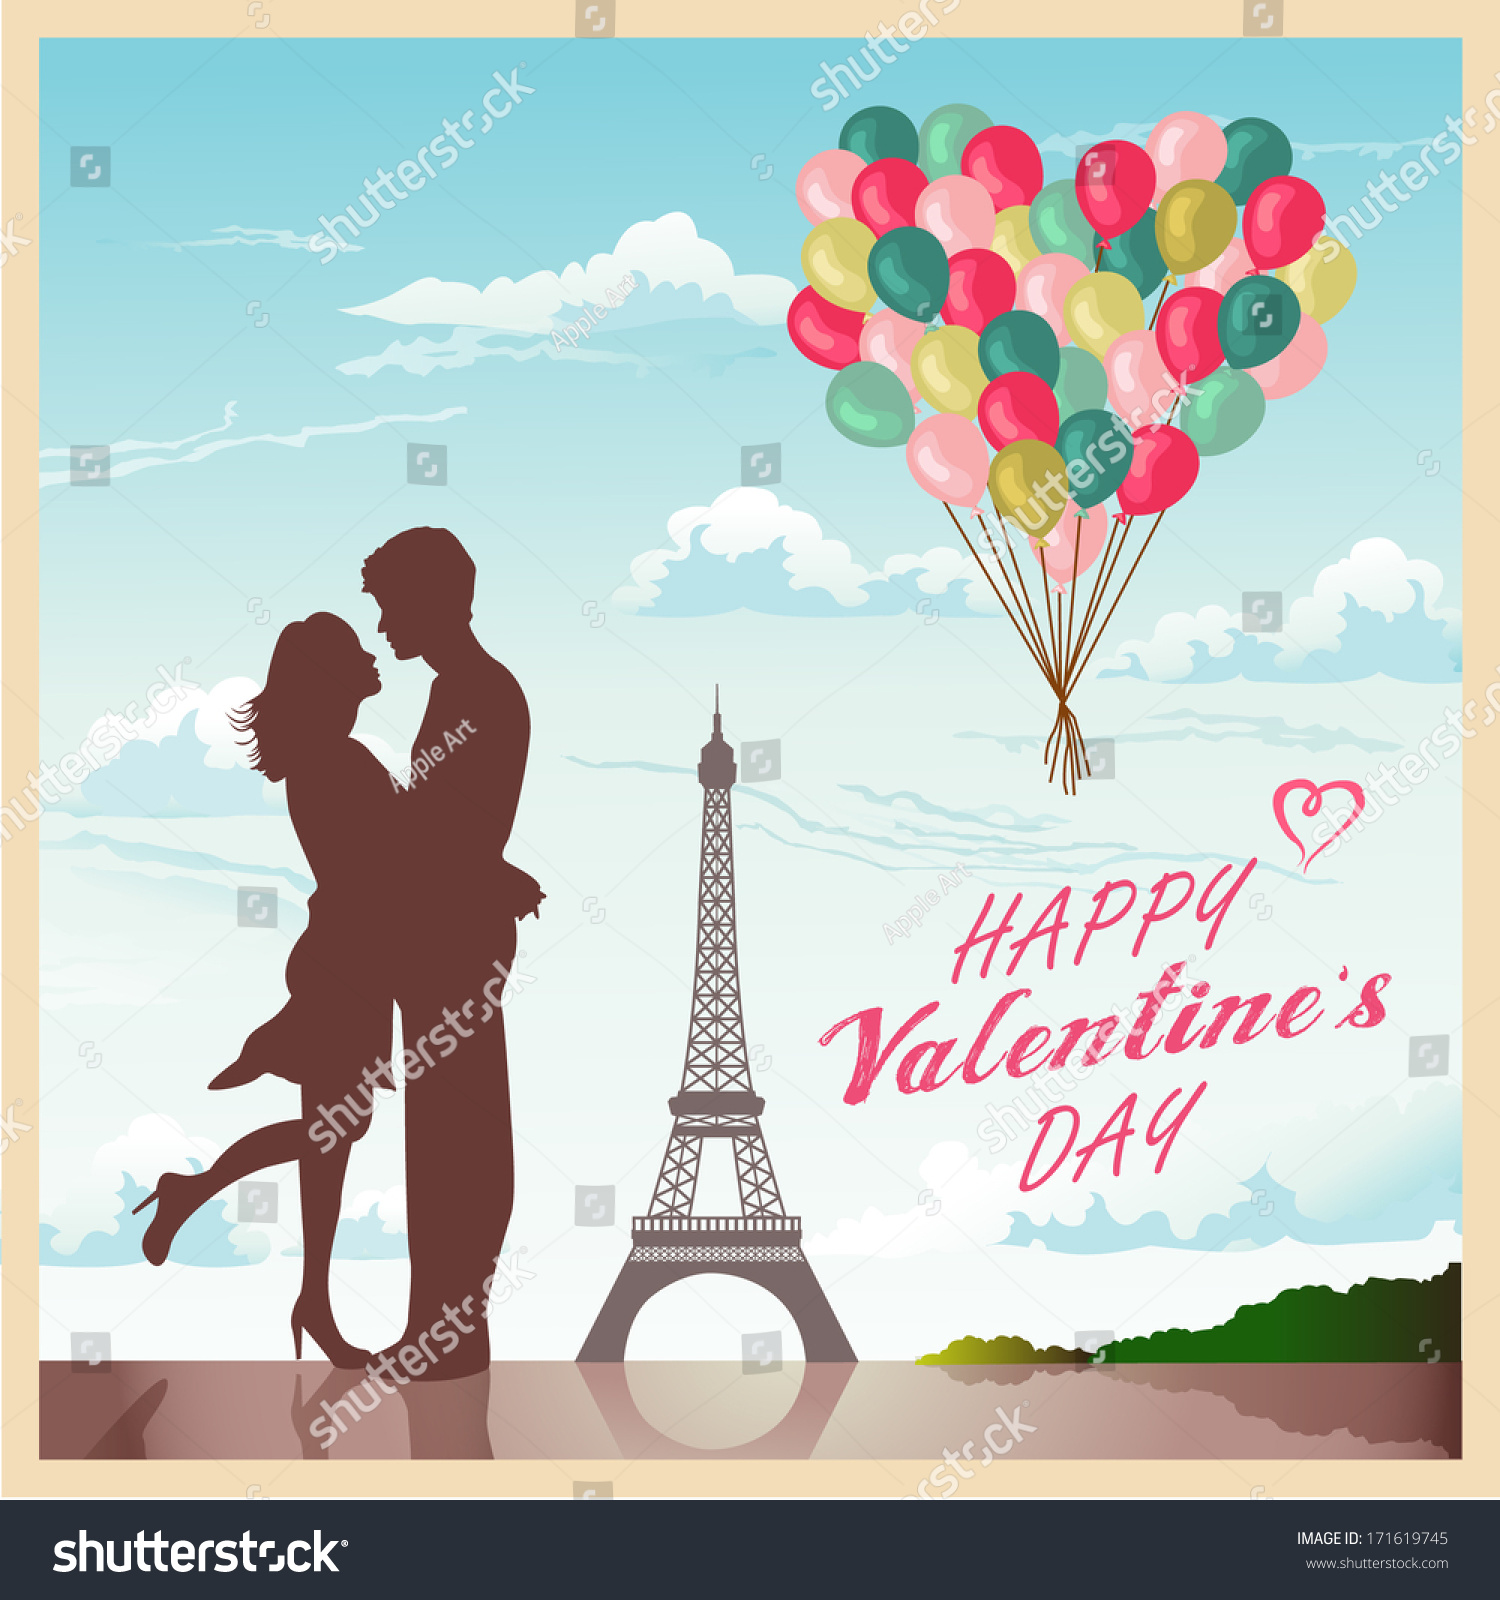 Valentines Day Card Romantic Couple Paris Stock Vector Royalty Free 171619745